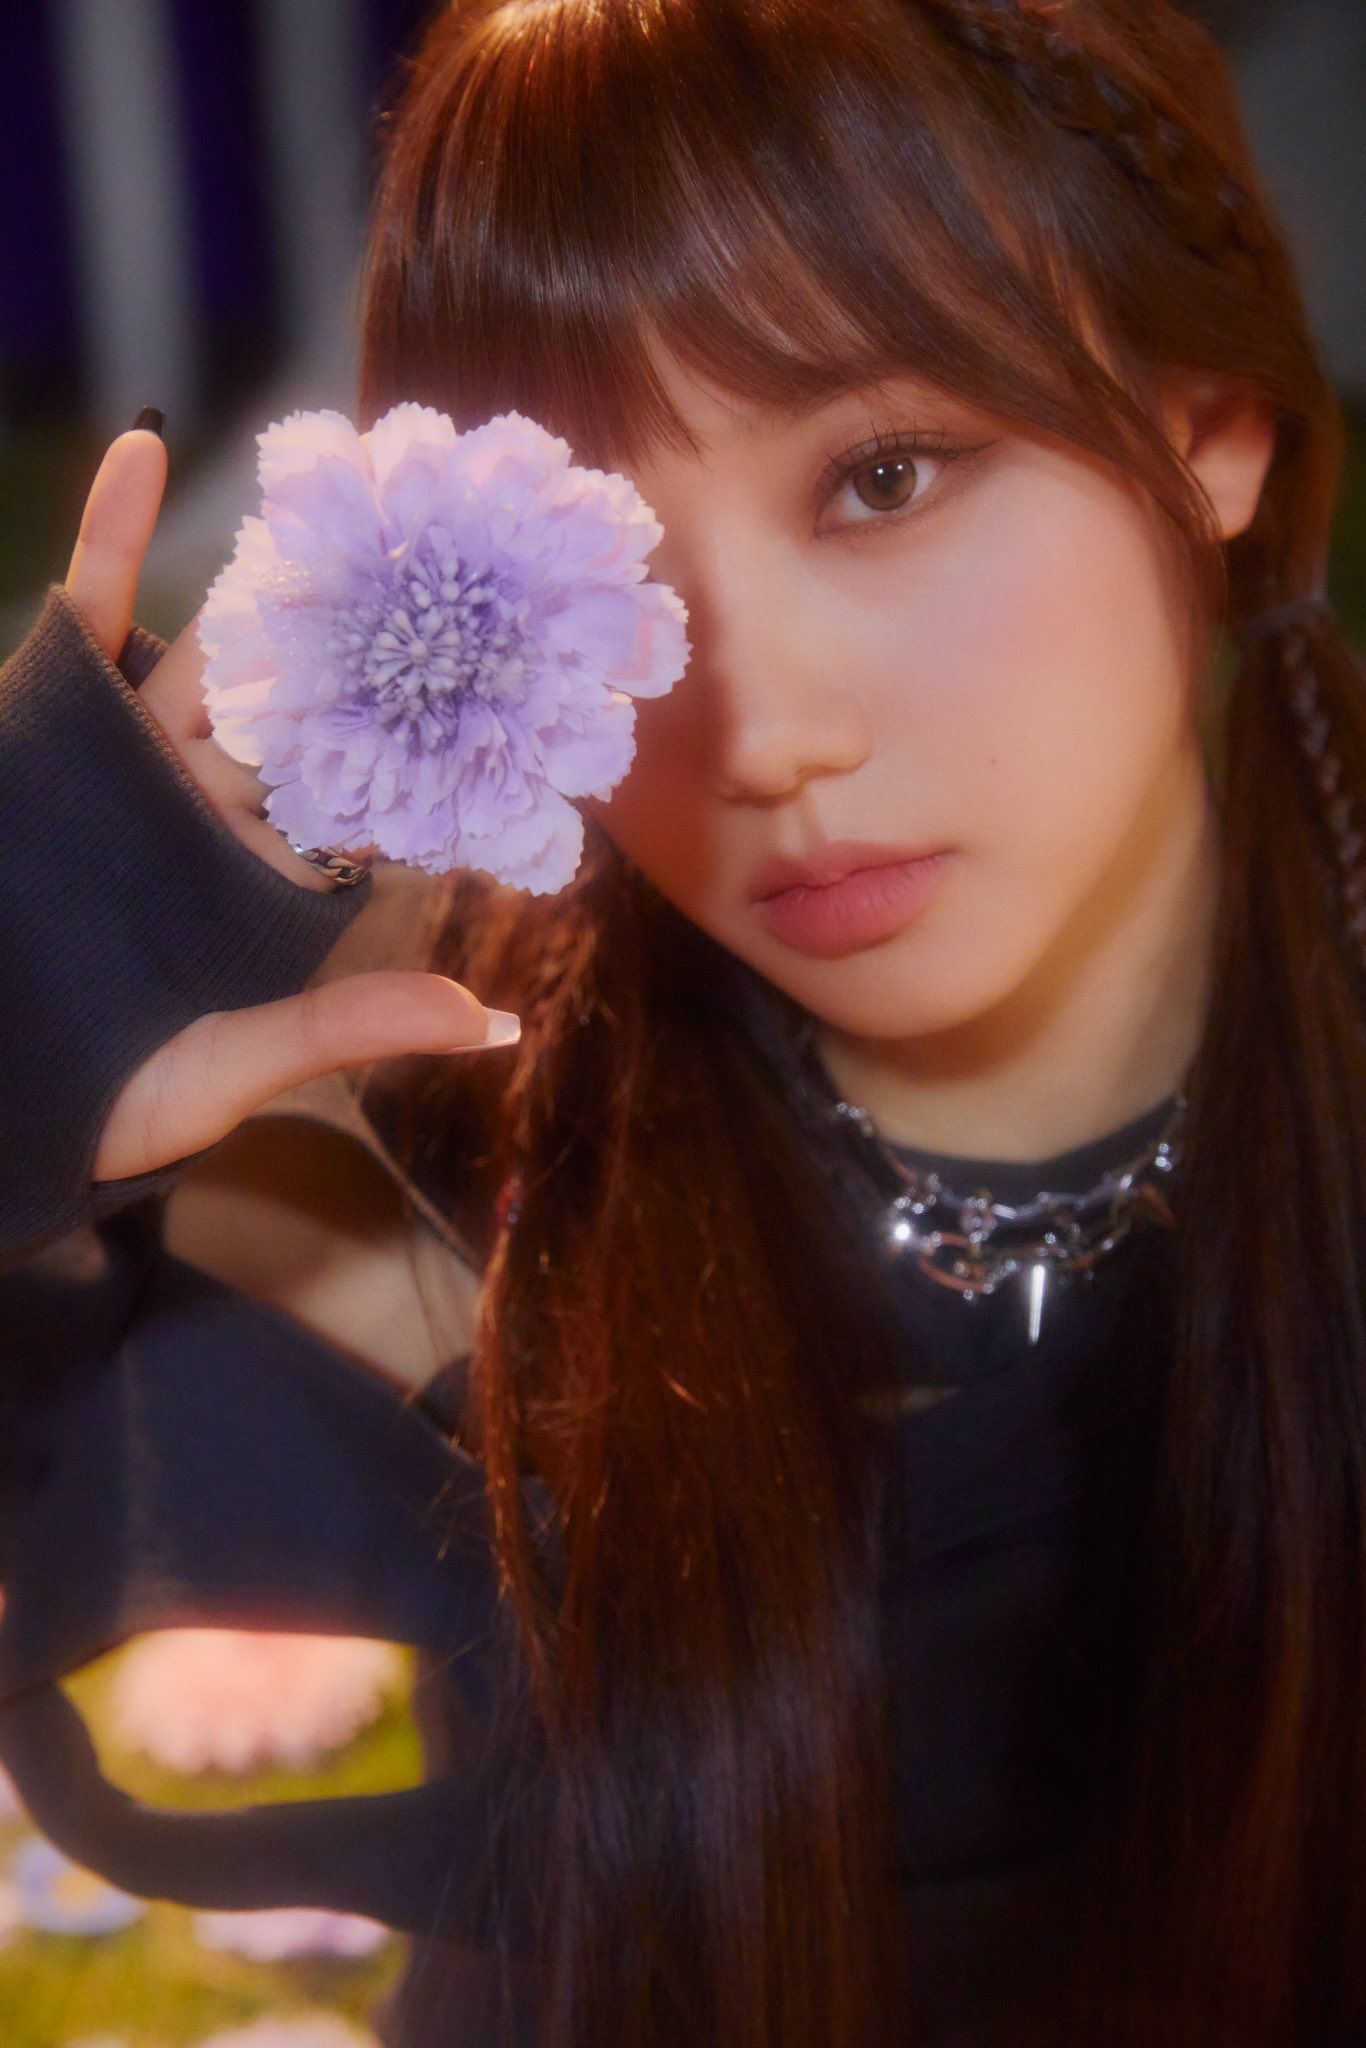 Jeongyeon holding a purple flower in front of her face - FIFTY FIFTY